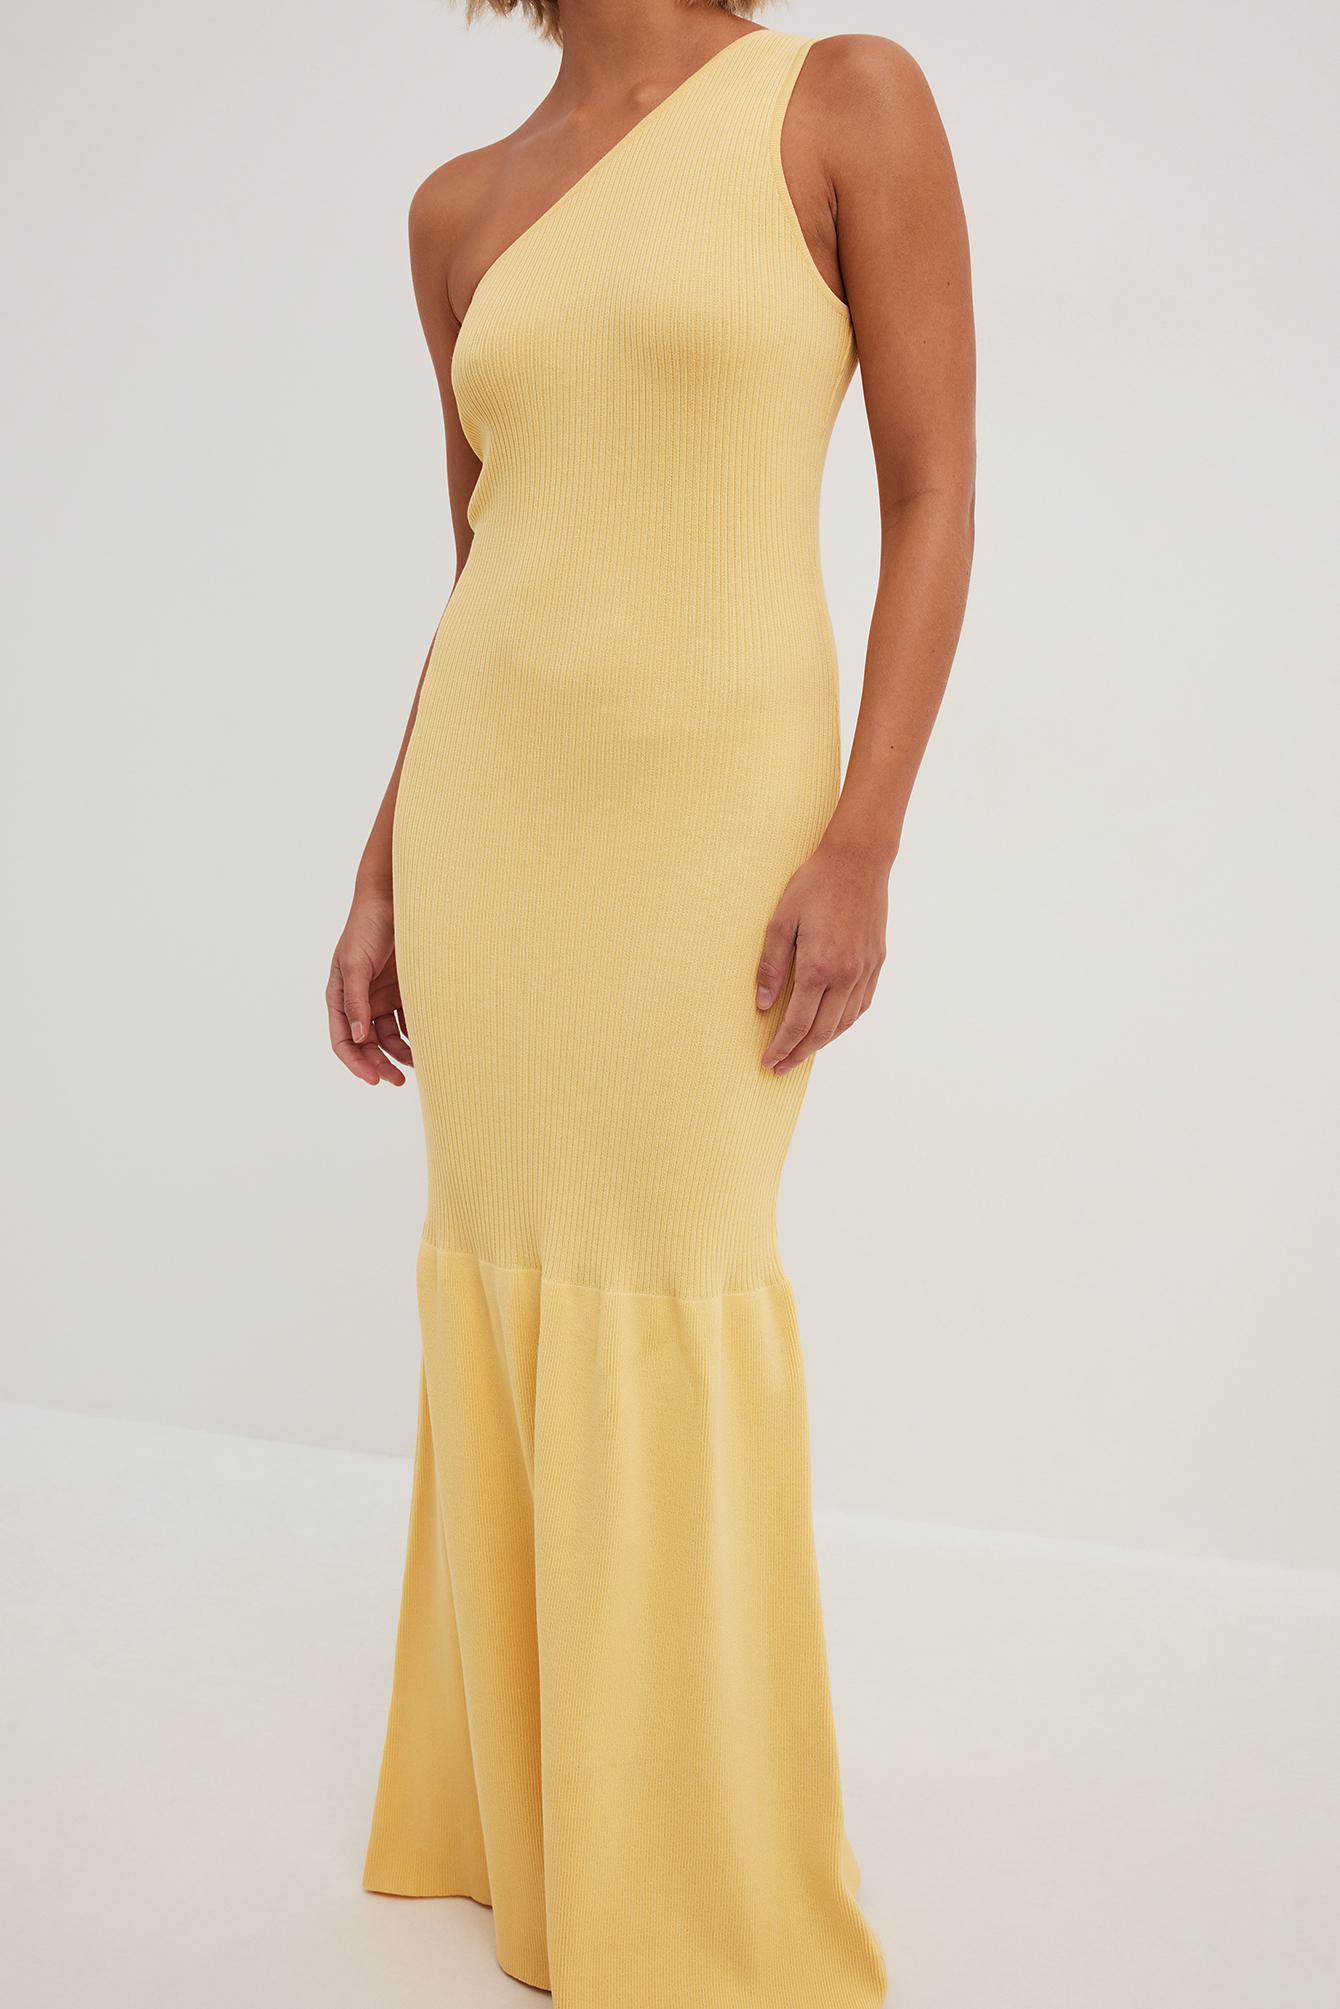 NA-KD Yellow One Shoulder Mermaid Detailed Maxi Dress | Lyst